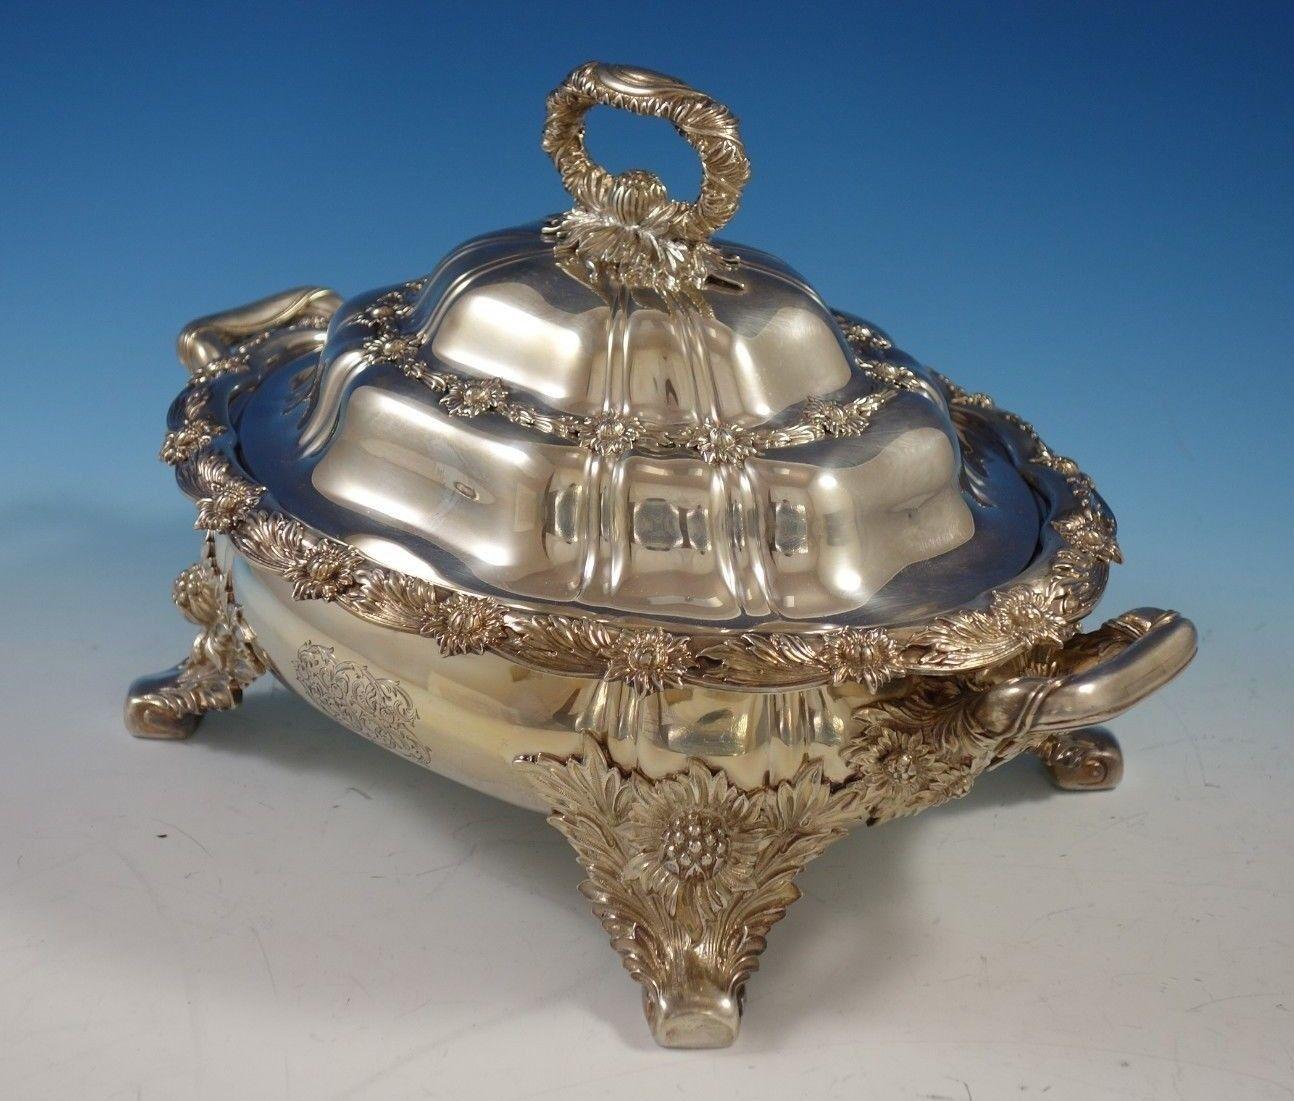 Stunning Chrysanthemum by Tiffany & Co. sterling silver footed covered vegetable dish. This dish features four large chrysanthemum feet, two side handles, and a handle on the cover. The piece is marked #5713-5957 and has a date mark M for